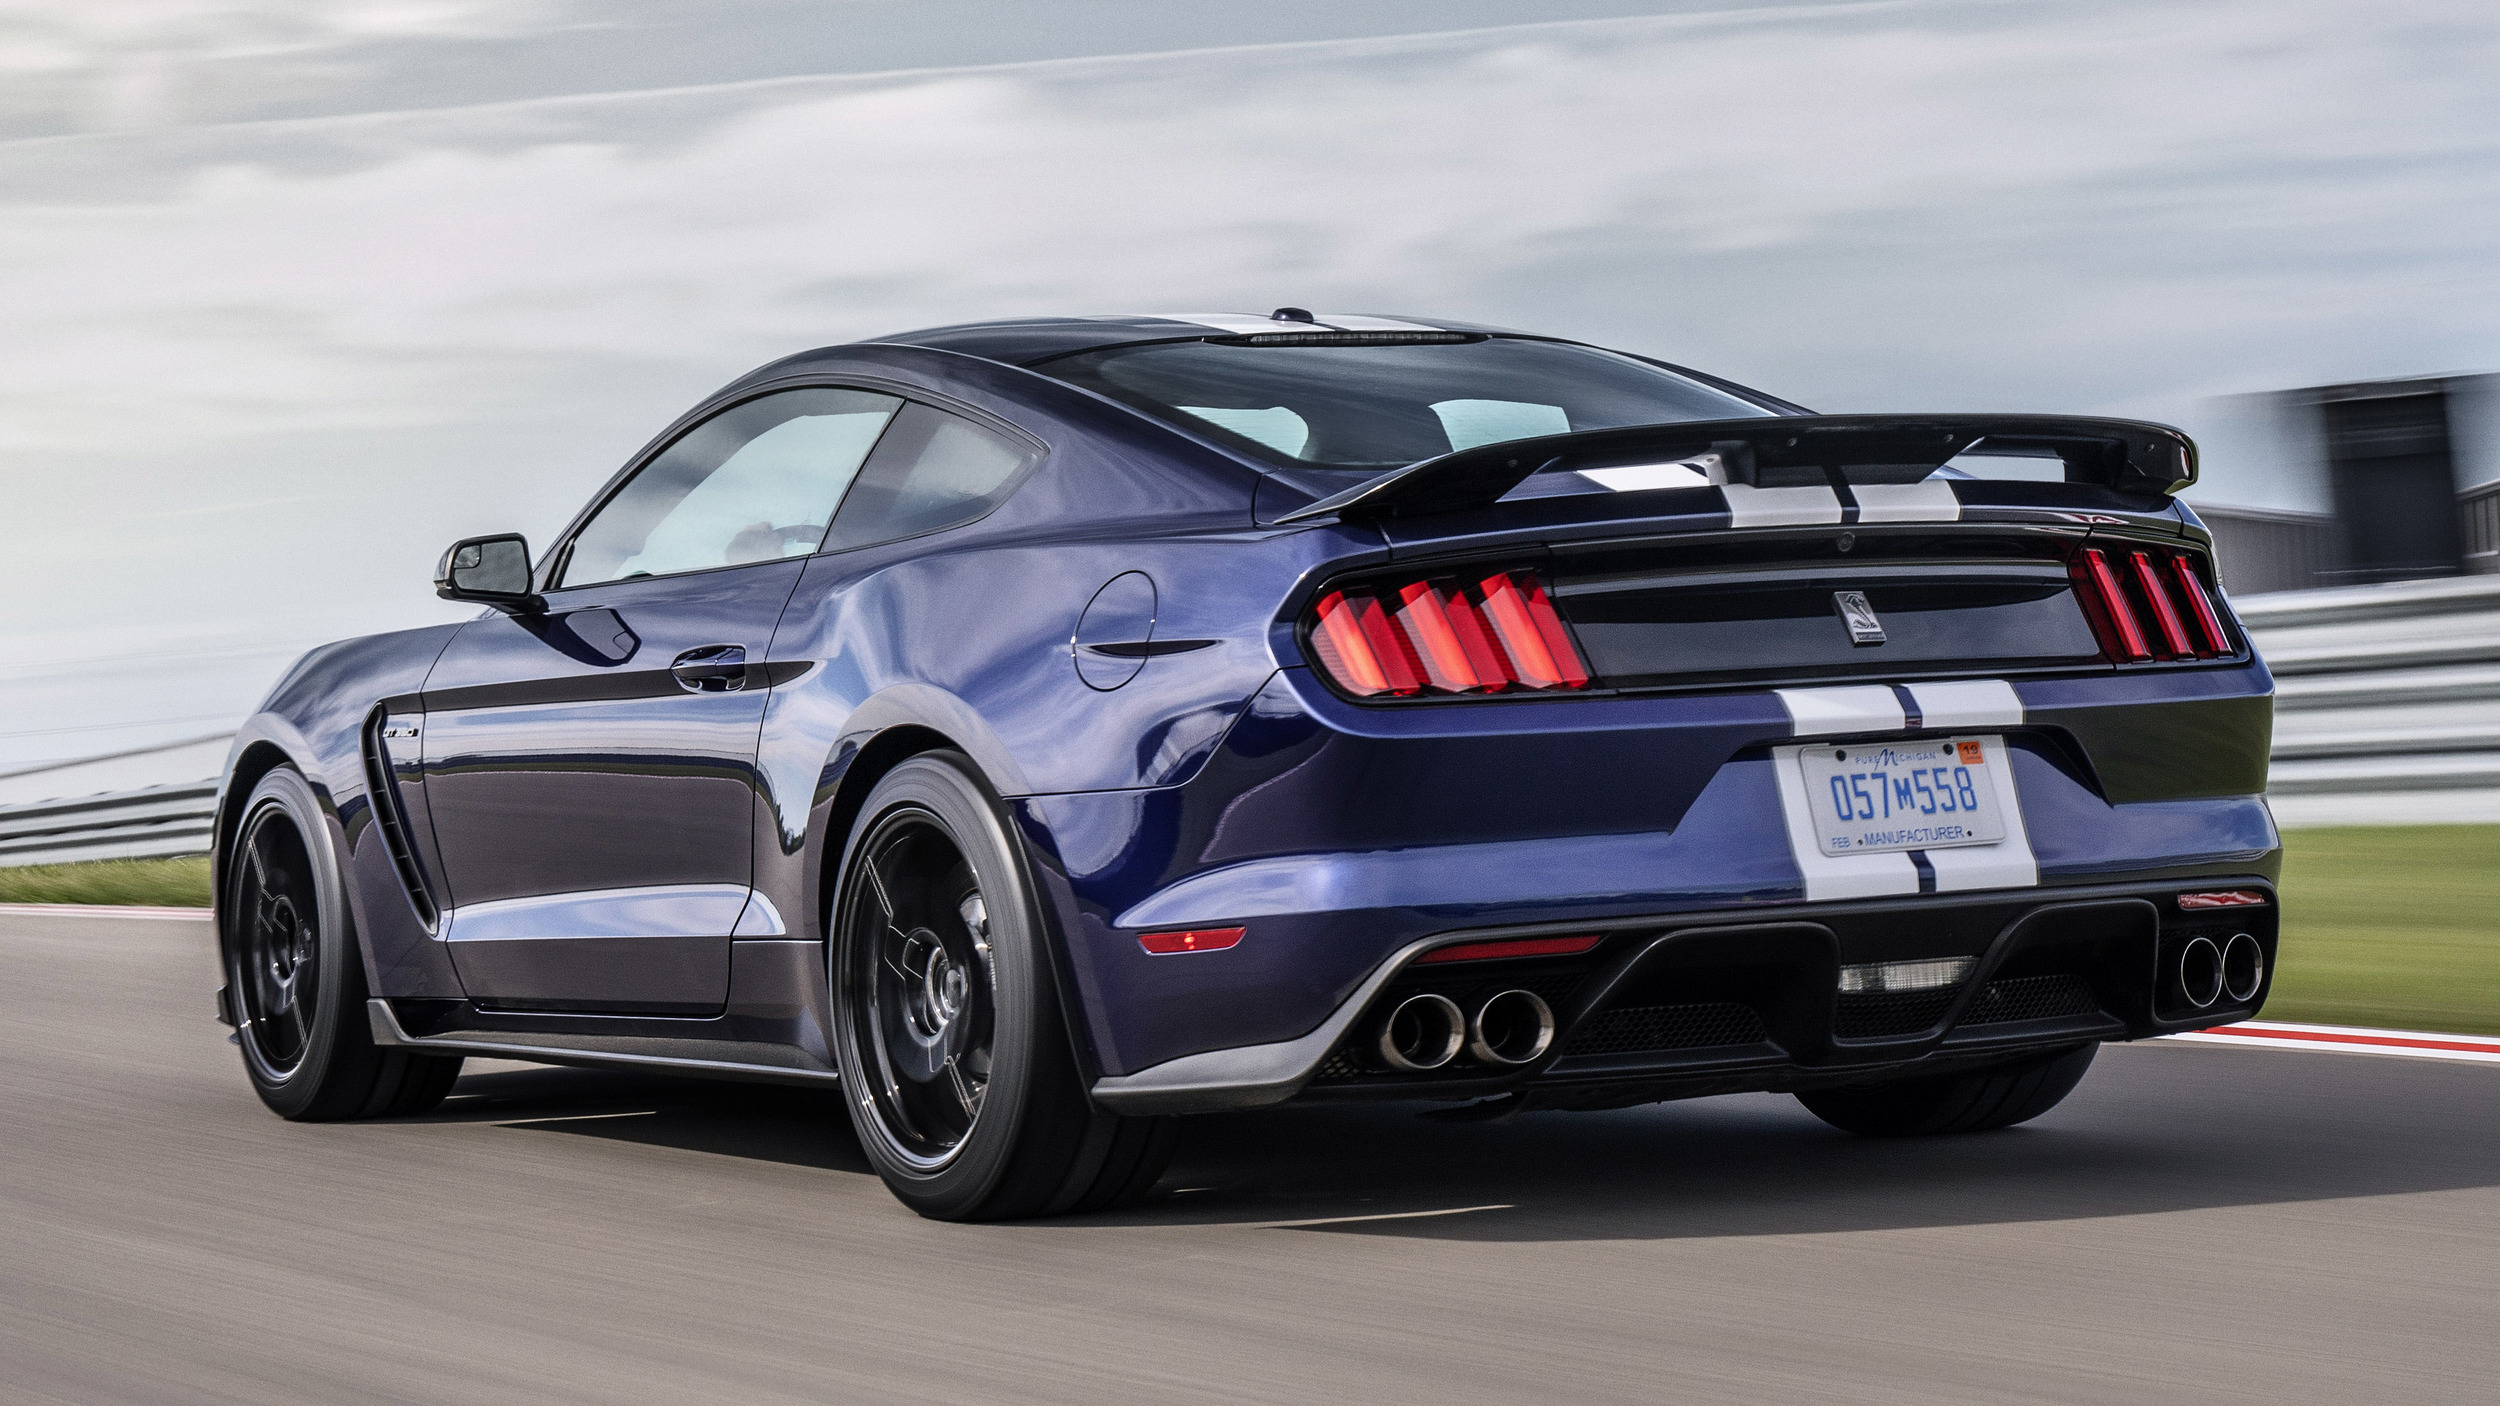 Ford Mustang Shelby GT350 upgraded for 2019 - Autoblog